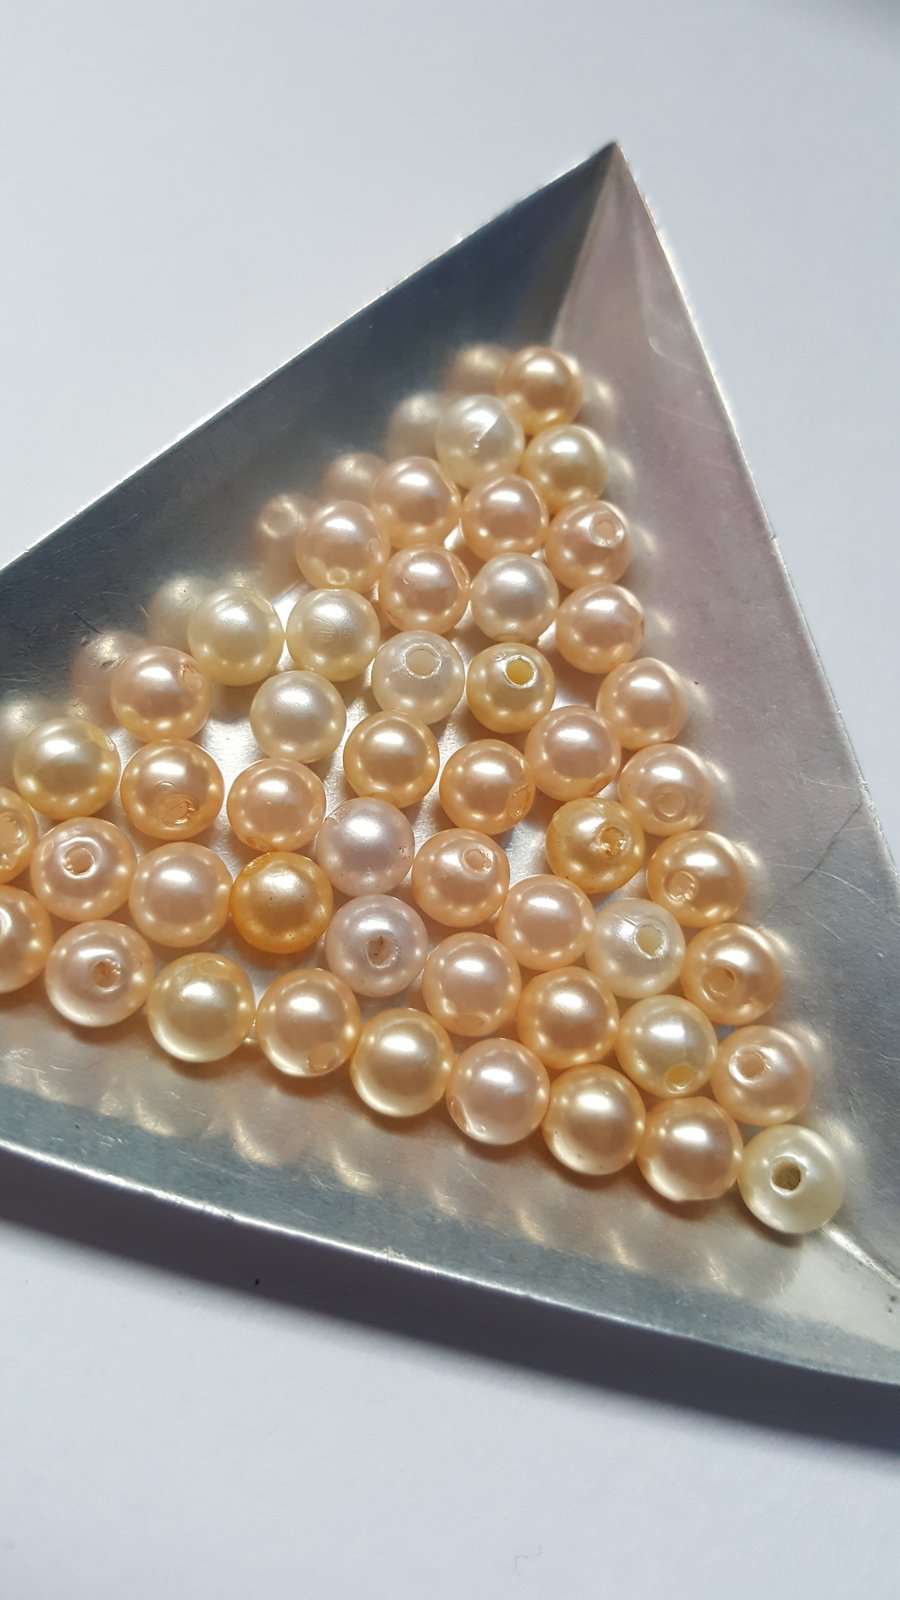 50 x Acrylic Pearl Beads - Round - 6mm - Butter Mix 